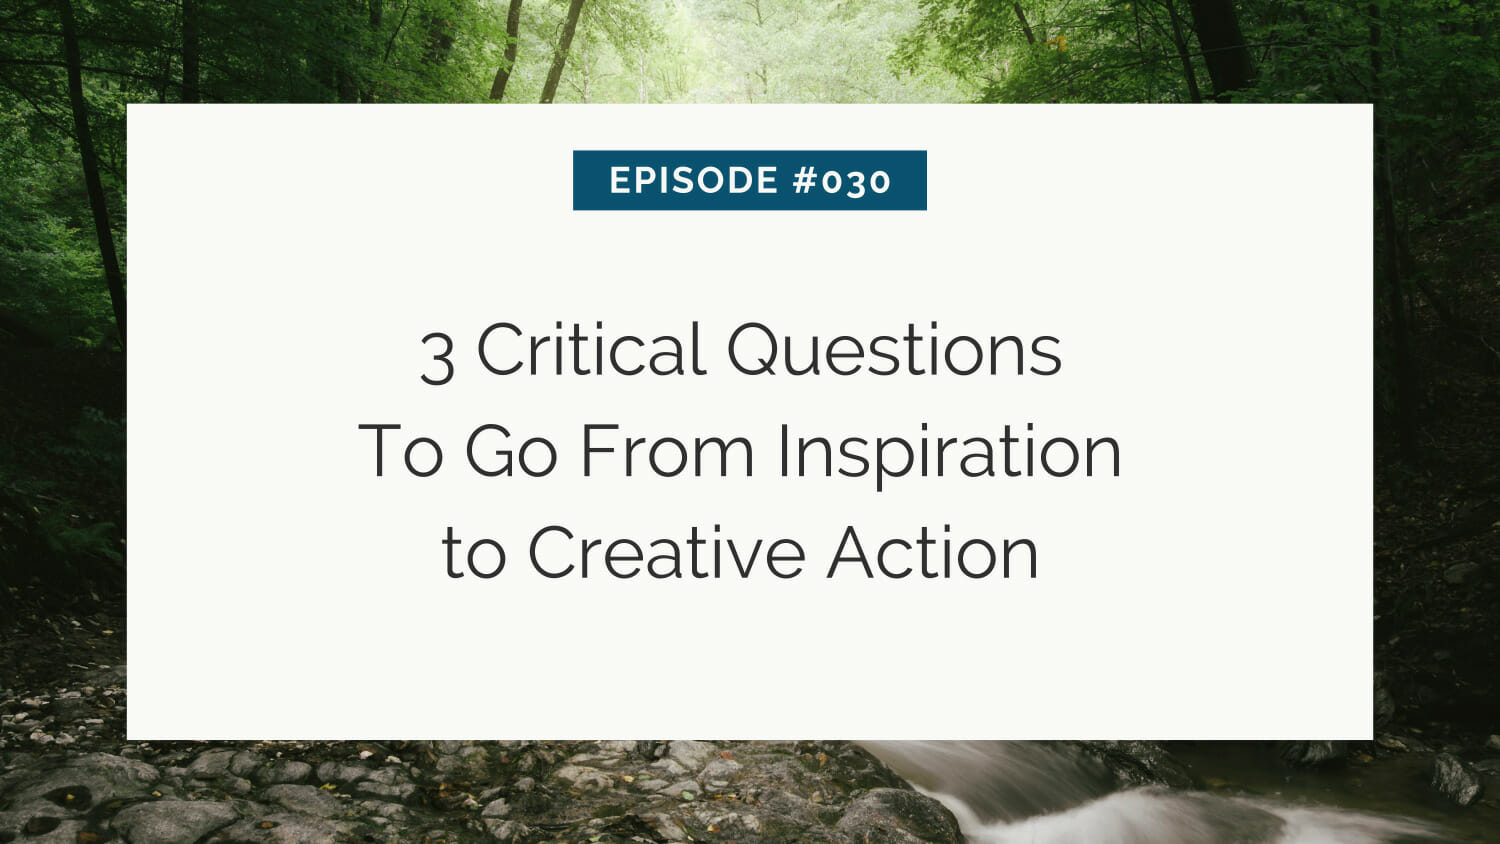 Presentation slide titled "episode #030: 3 critical questions to go from inspiration to creative action" displayed over a serene nature backdrop with trees and a stream.